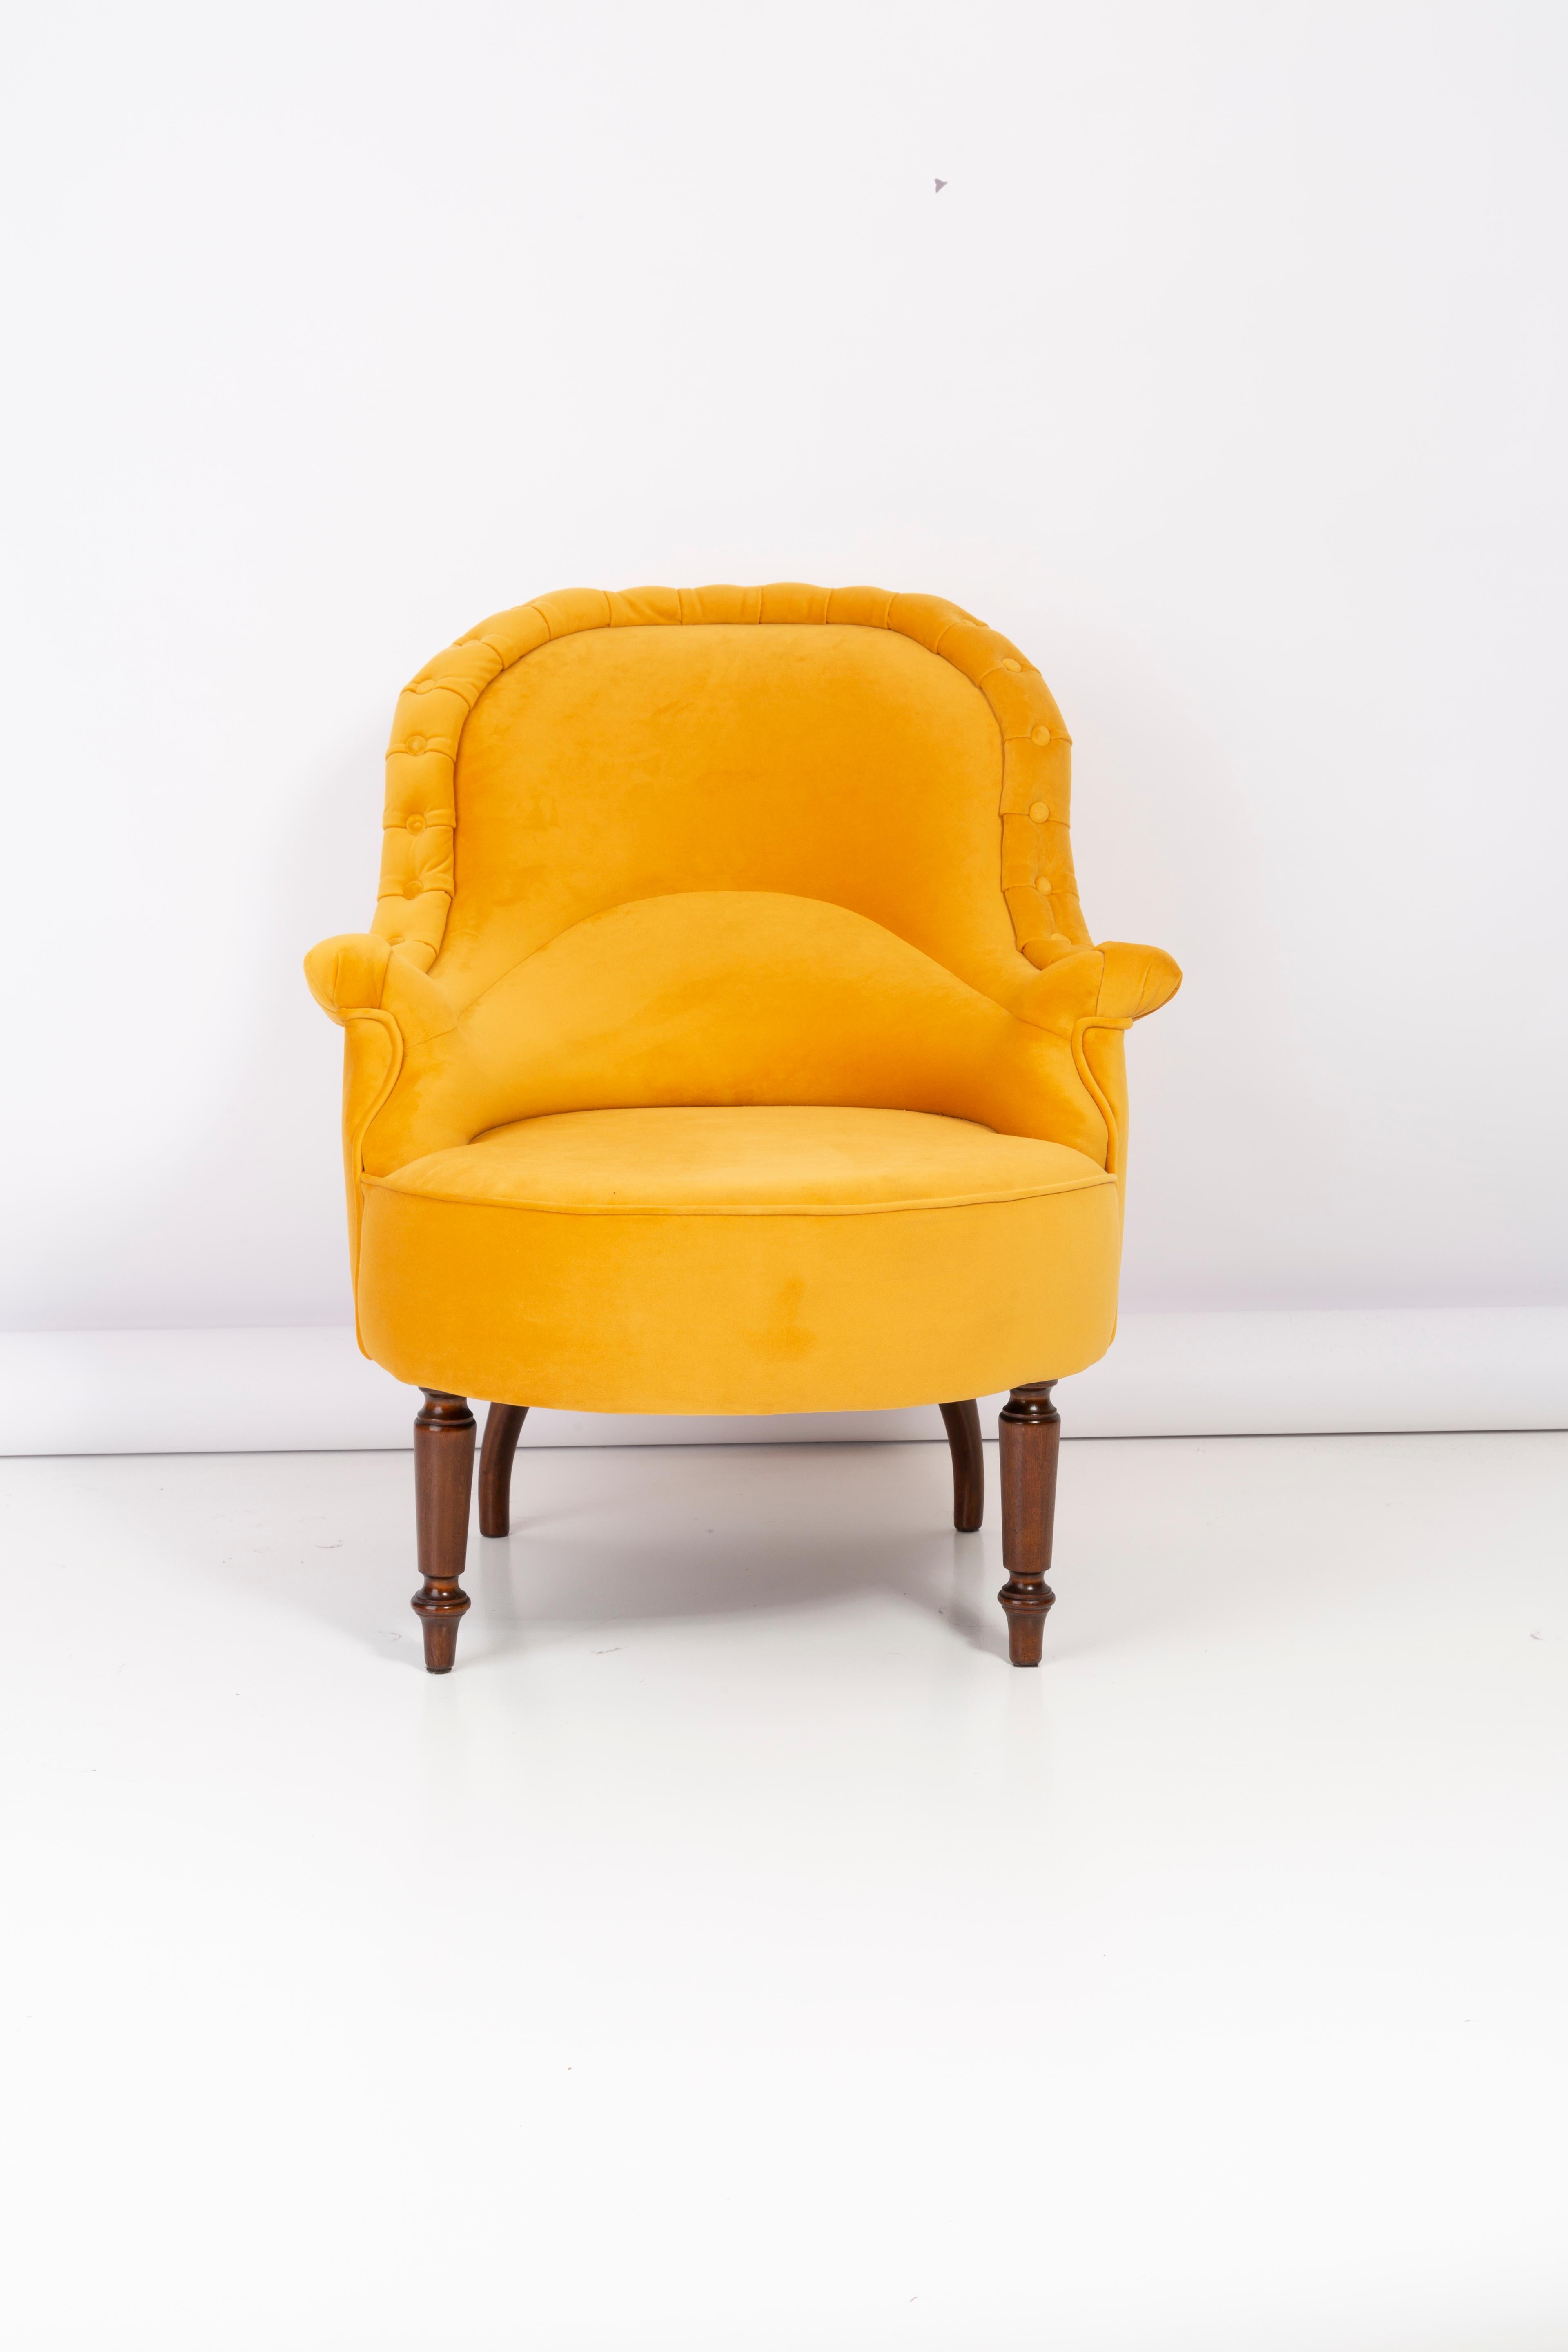 Hand-Crafted Unique Yellow Mustard Armchair, 1930s, Germany For Sale